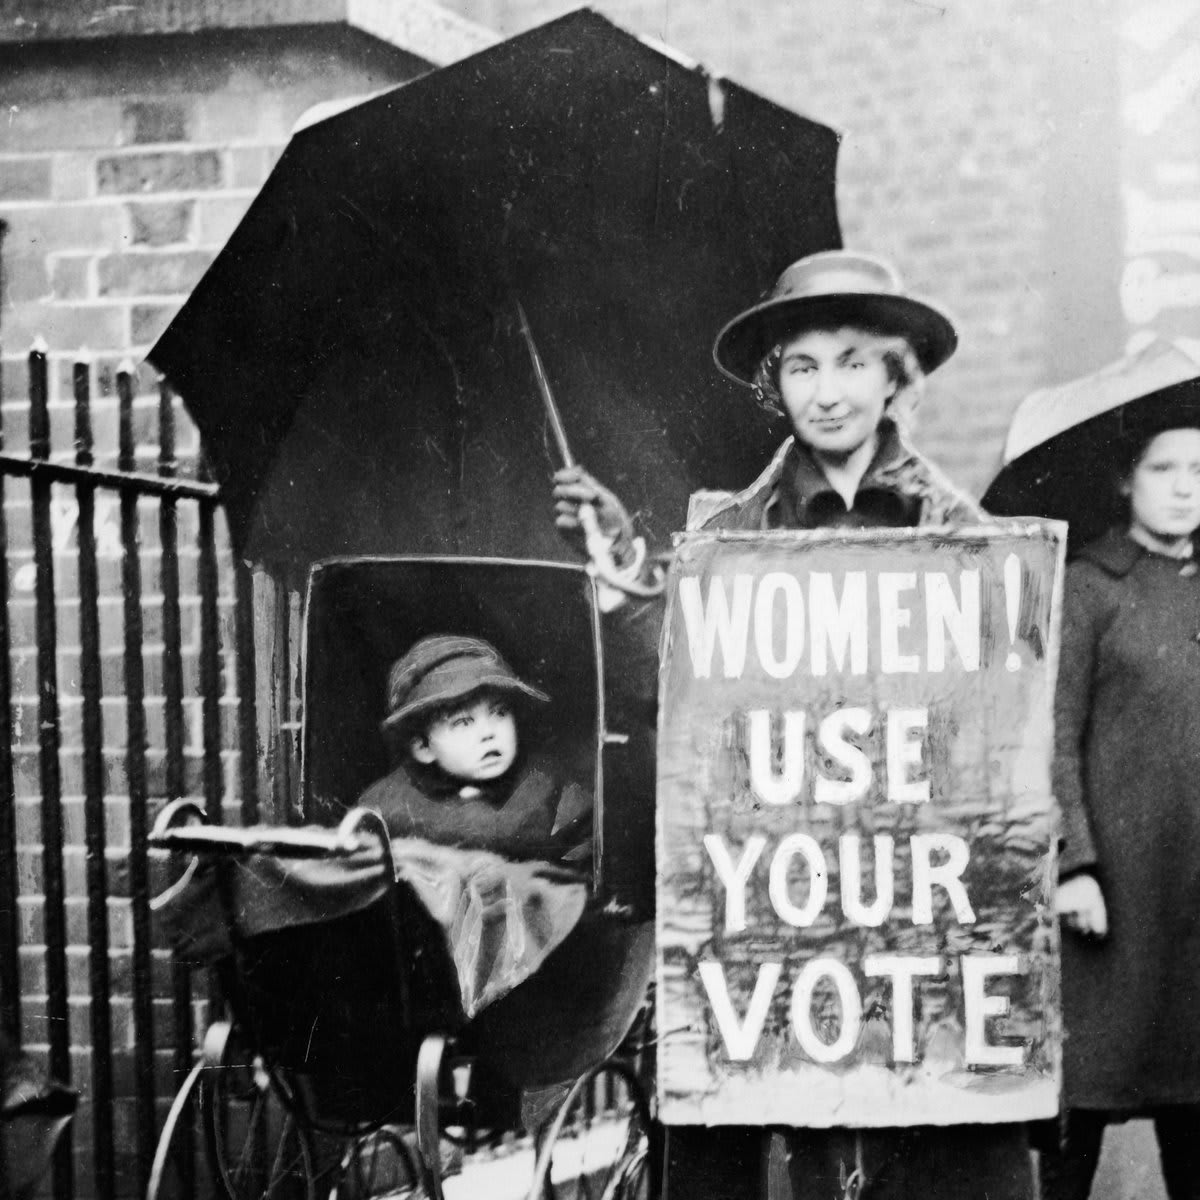 The 19th Amendment to the U.S. Constitution, granting American women the right to vote, was passed by Congress and sent to the states for ratification on ThisDayInHistory in 1919.